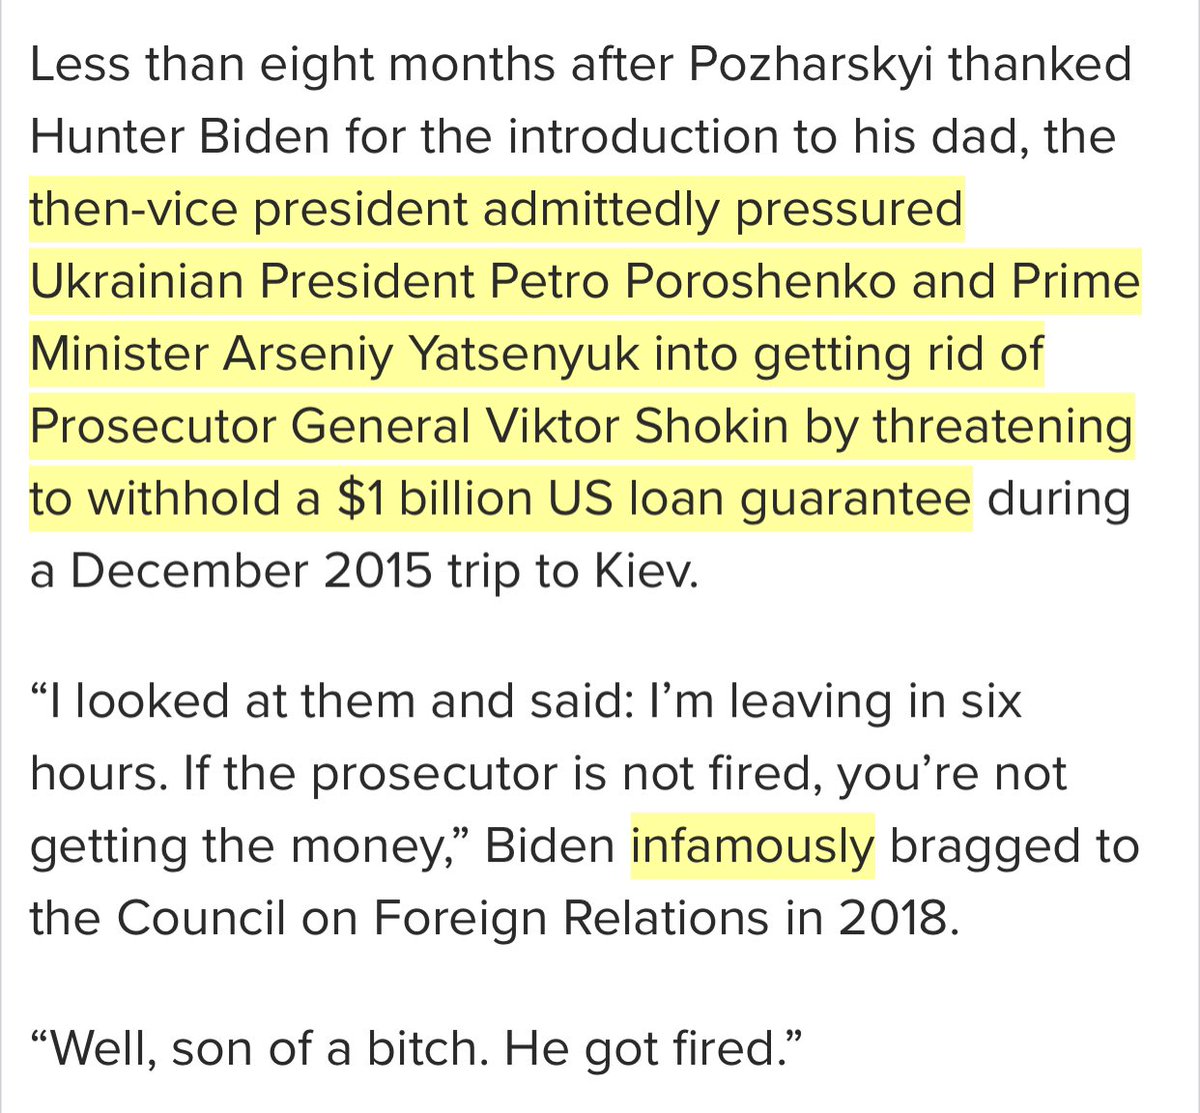 And the rest of the article makes that point clear. The takeaway is that Biden pressured Ukraine to fire Shokin in order to help Hunter and Burisma.The article’s use of “infamously” is interesting here... because it wasn’t “infamous.”